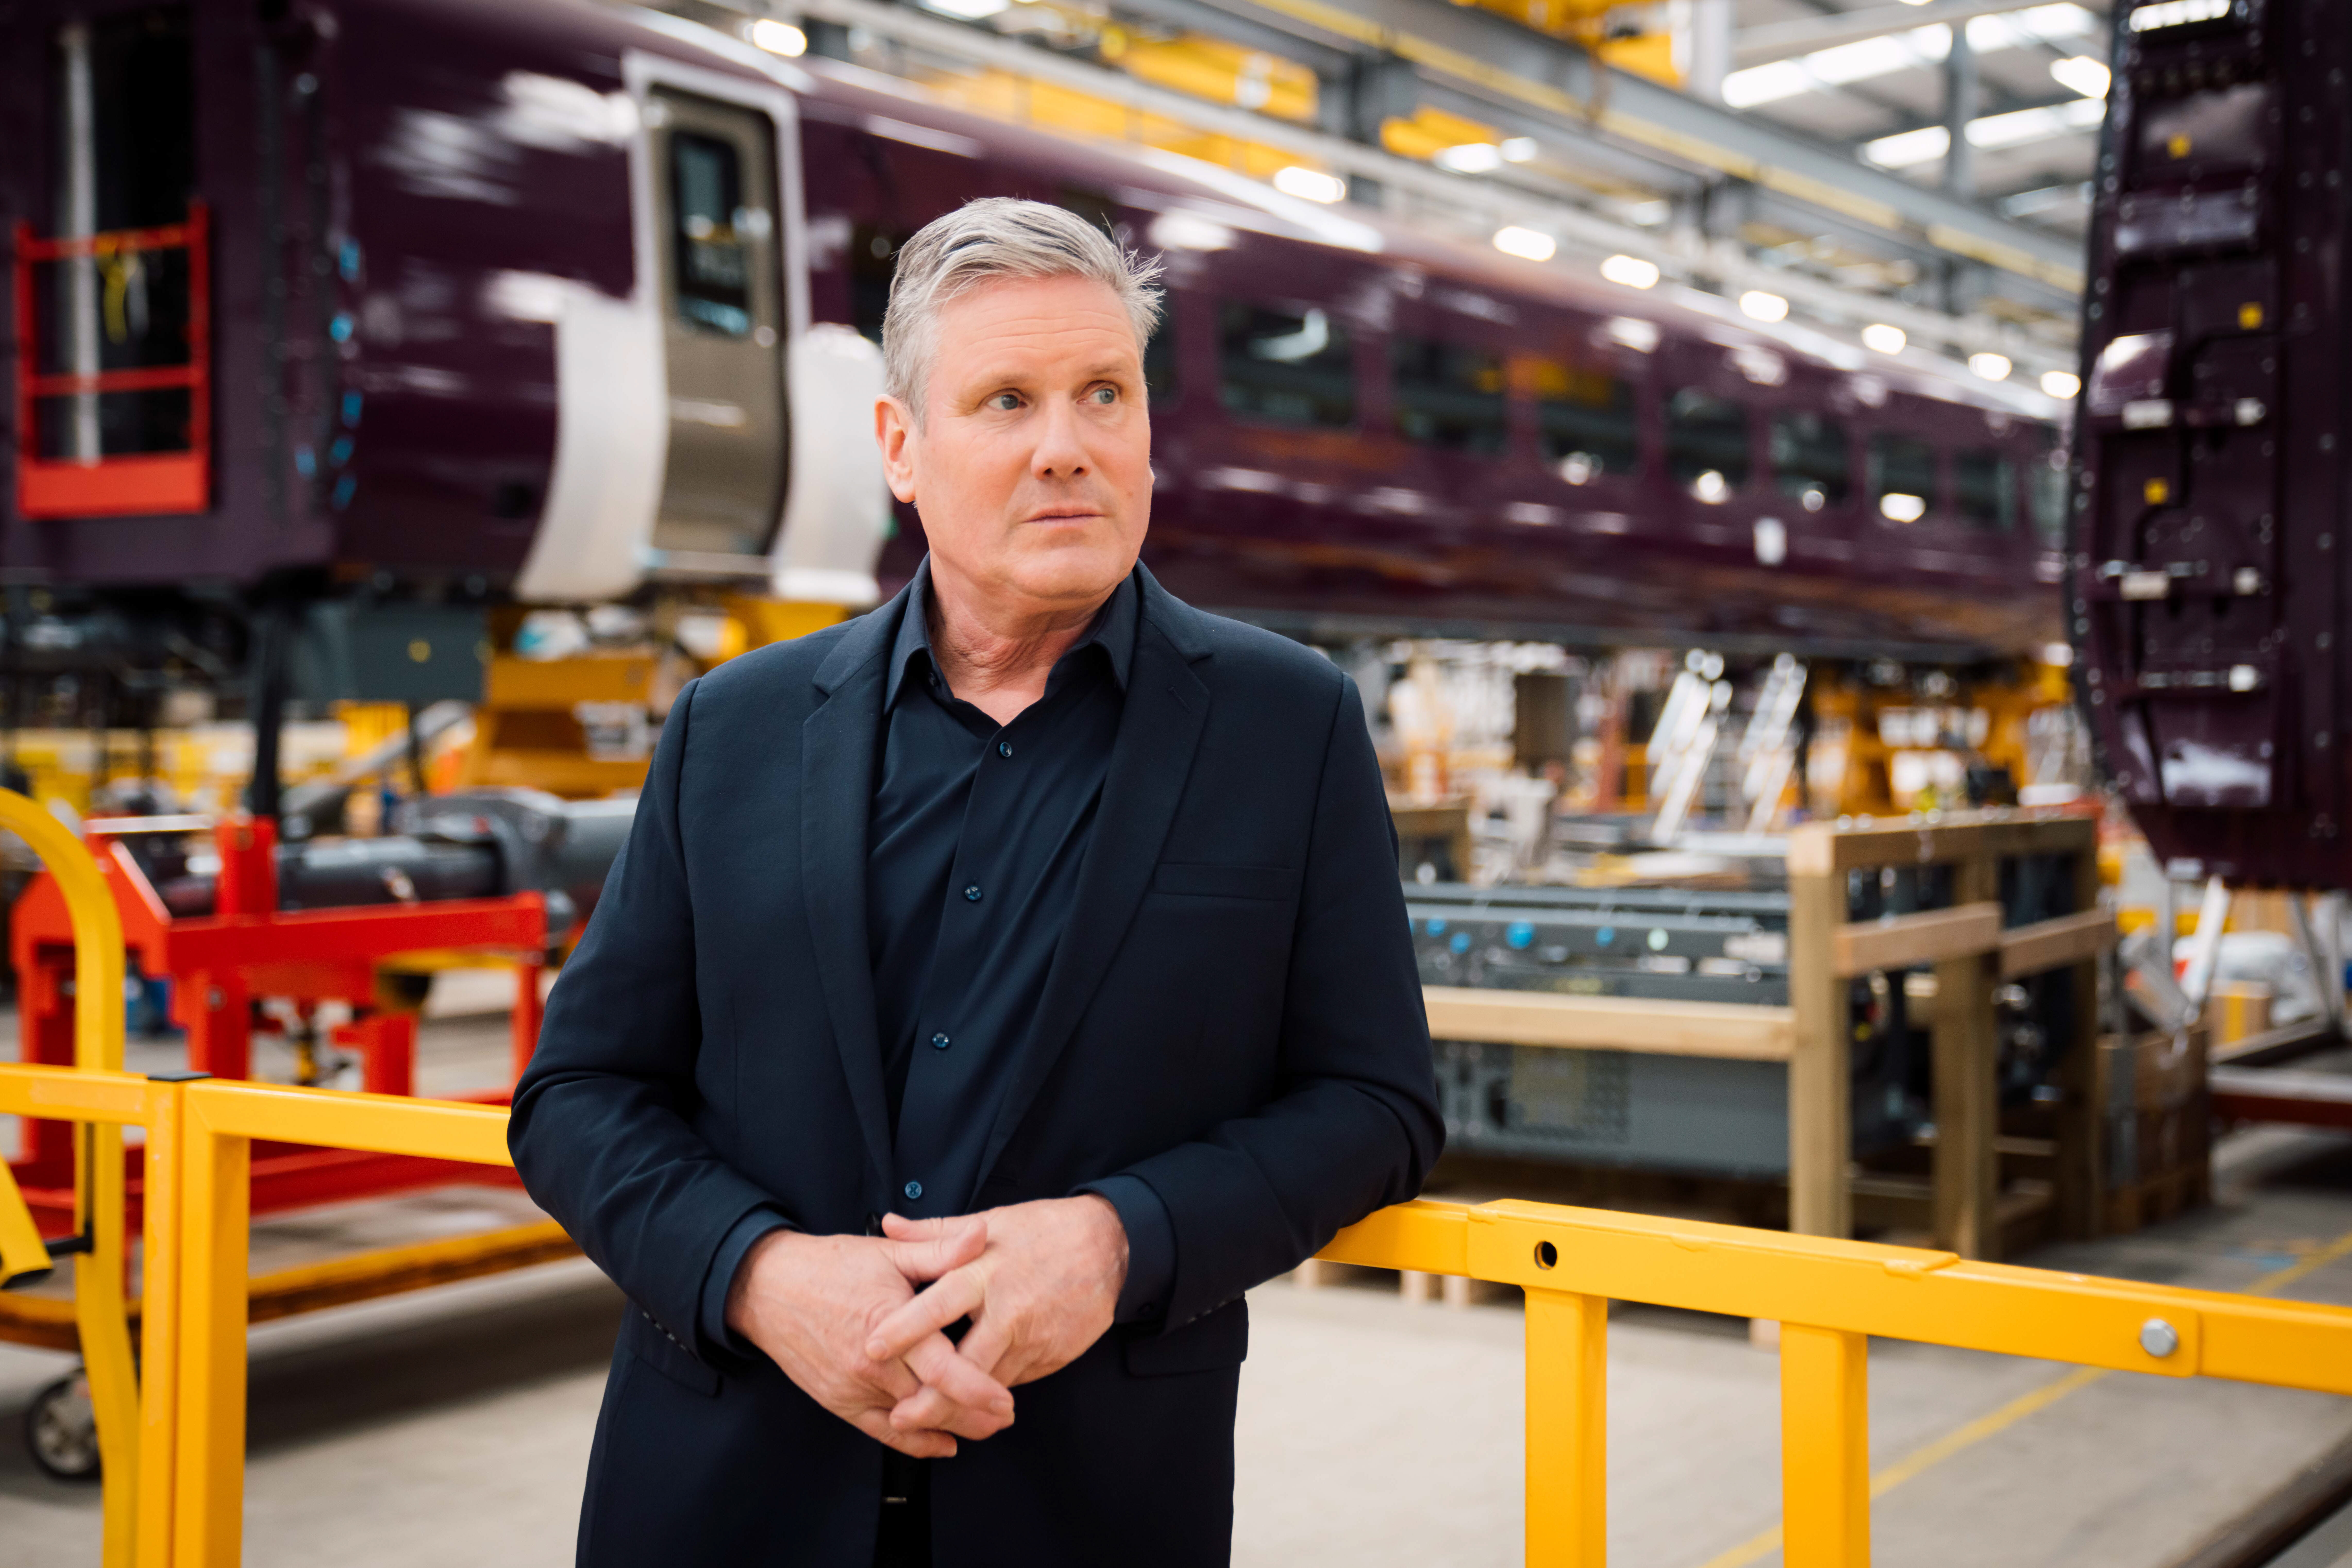 Keir Starmer stood in a factory in front of two train carriages, looking to the right of the camera shot